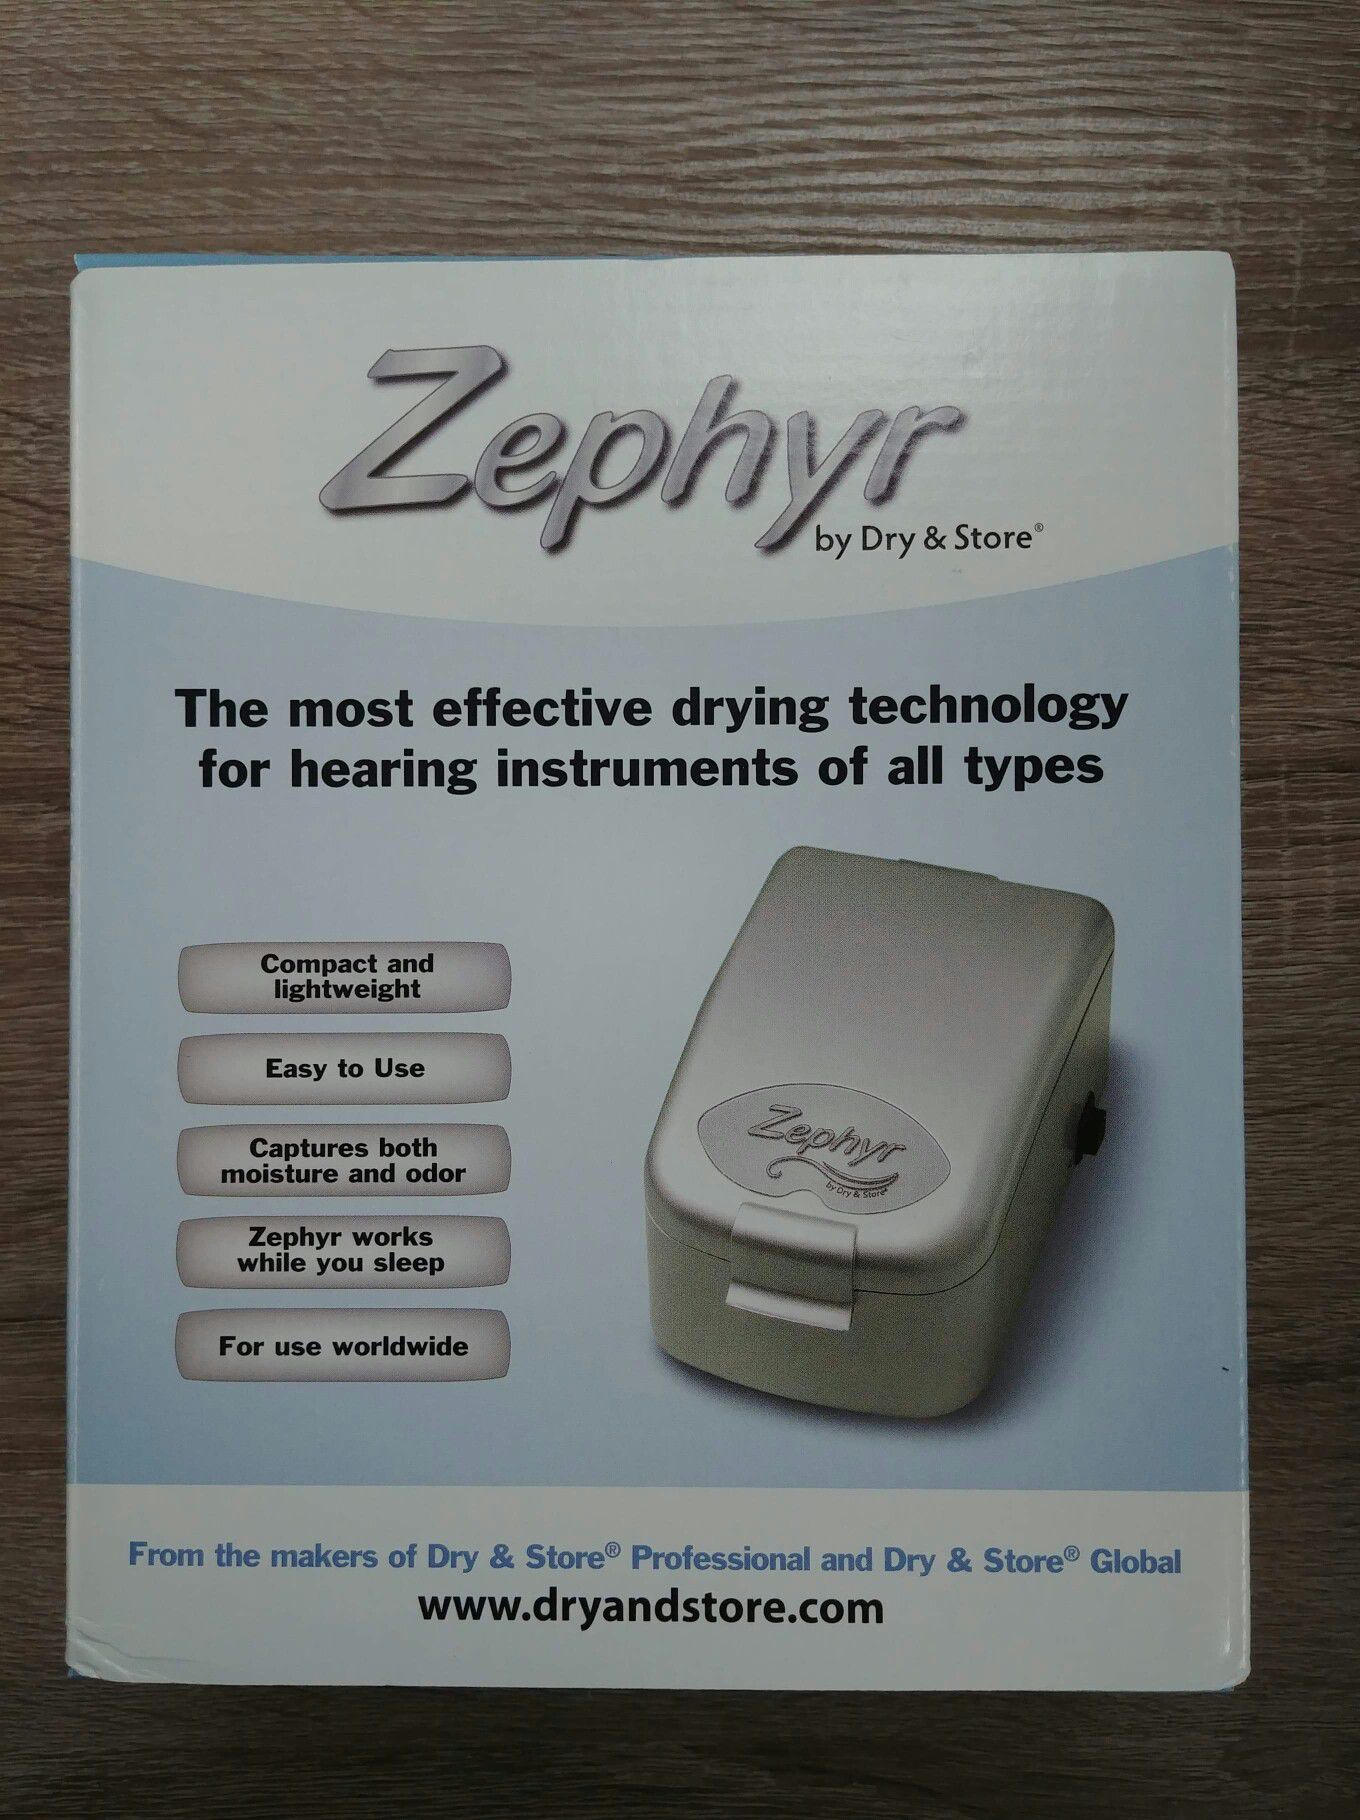 Zephyr by Dry & Store Hearing Aid Dryer/Dehumidifier